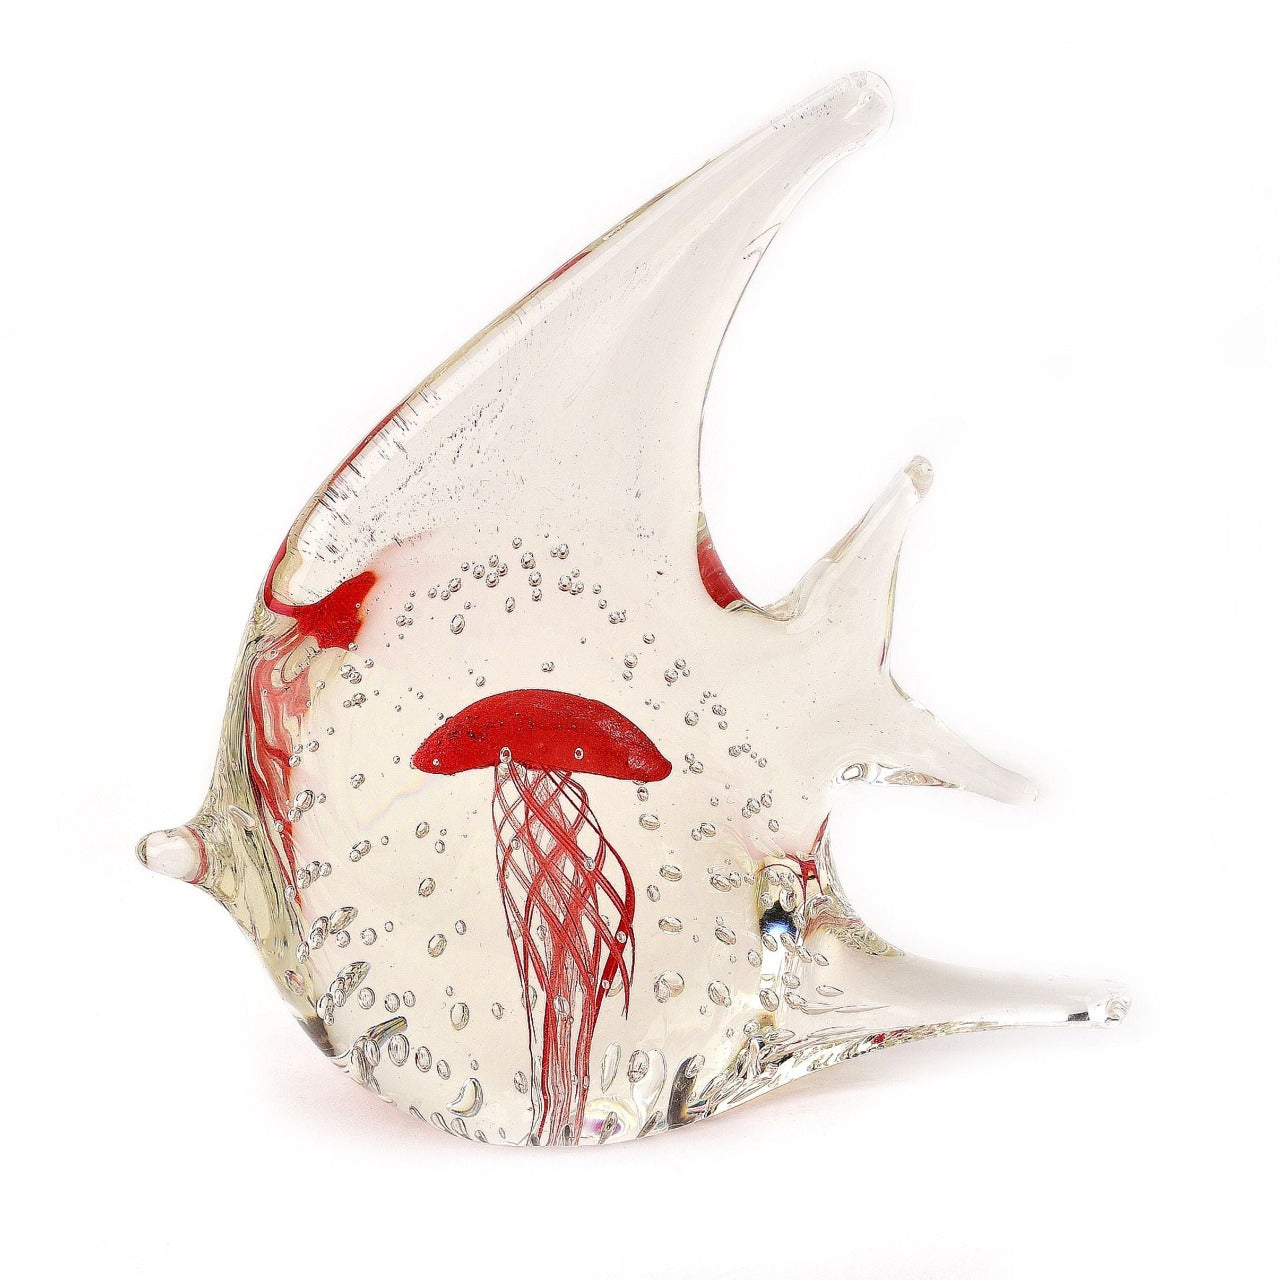 Objets d'Art Glass Figurine - Fish  A beautifully elegant handmade glass ornament. From Objets d'Art by SOPHIA® - hand blown and one hundred percent unique.